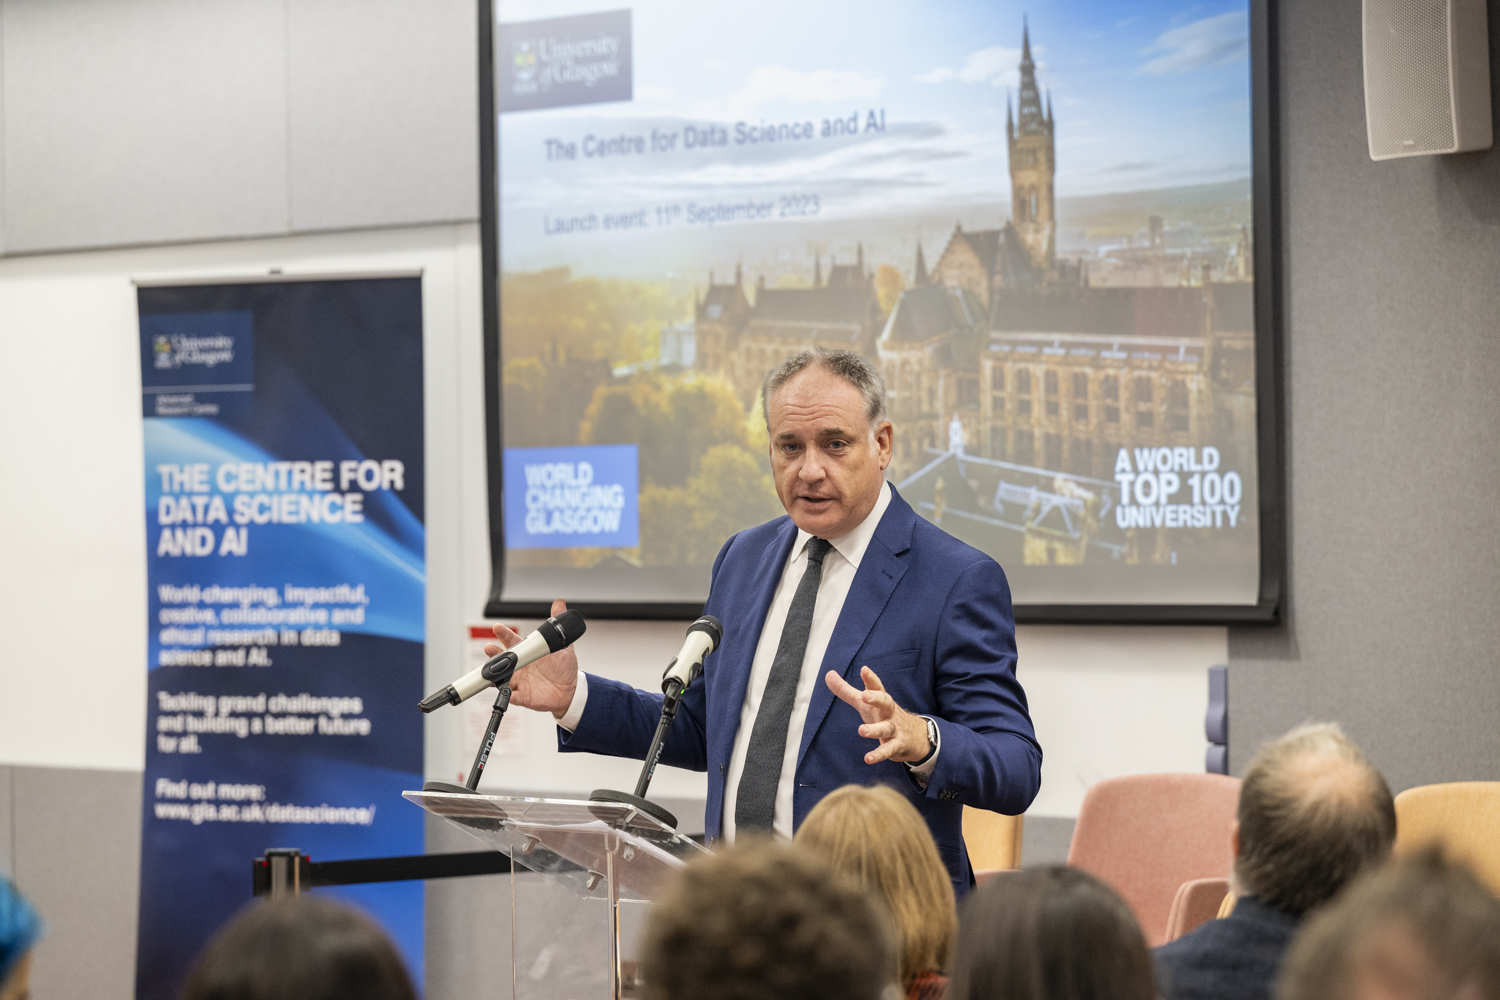 Richard Lochhead MSP at the launch of the University of Glasgow's Centre for Data Science and AI